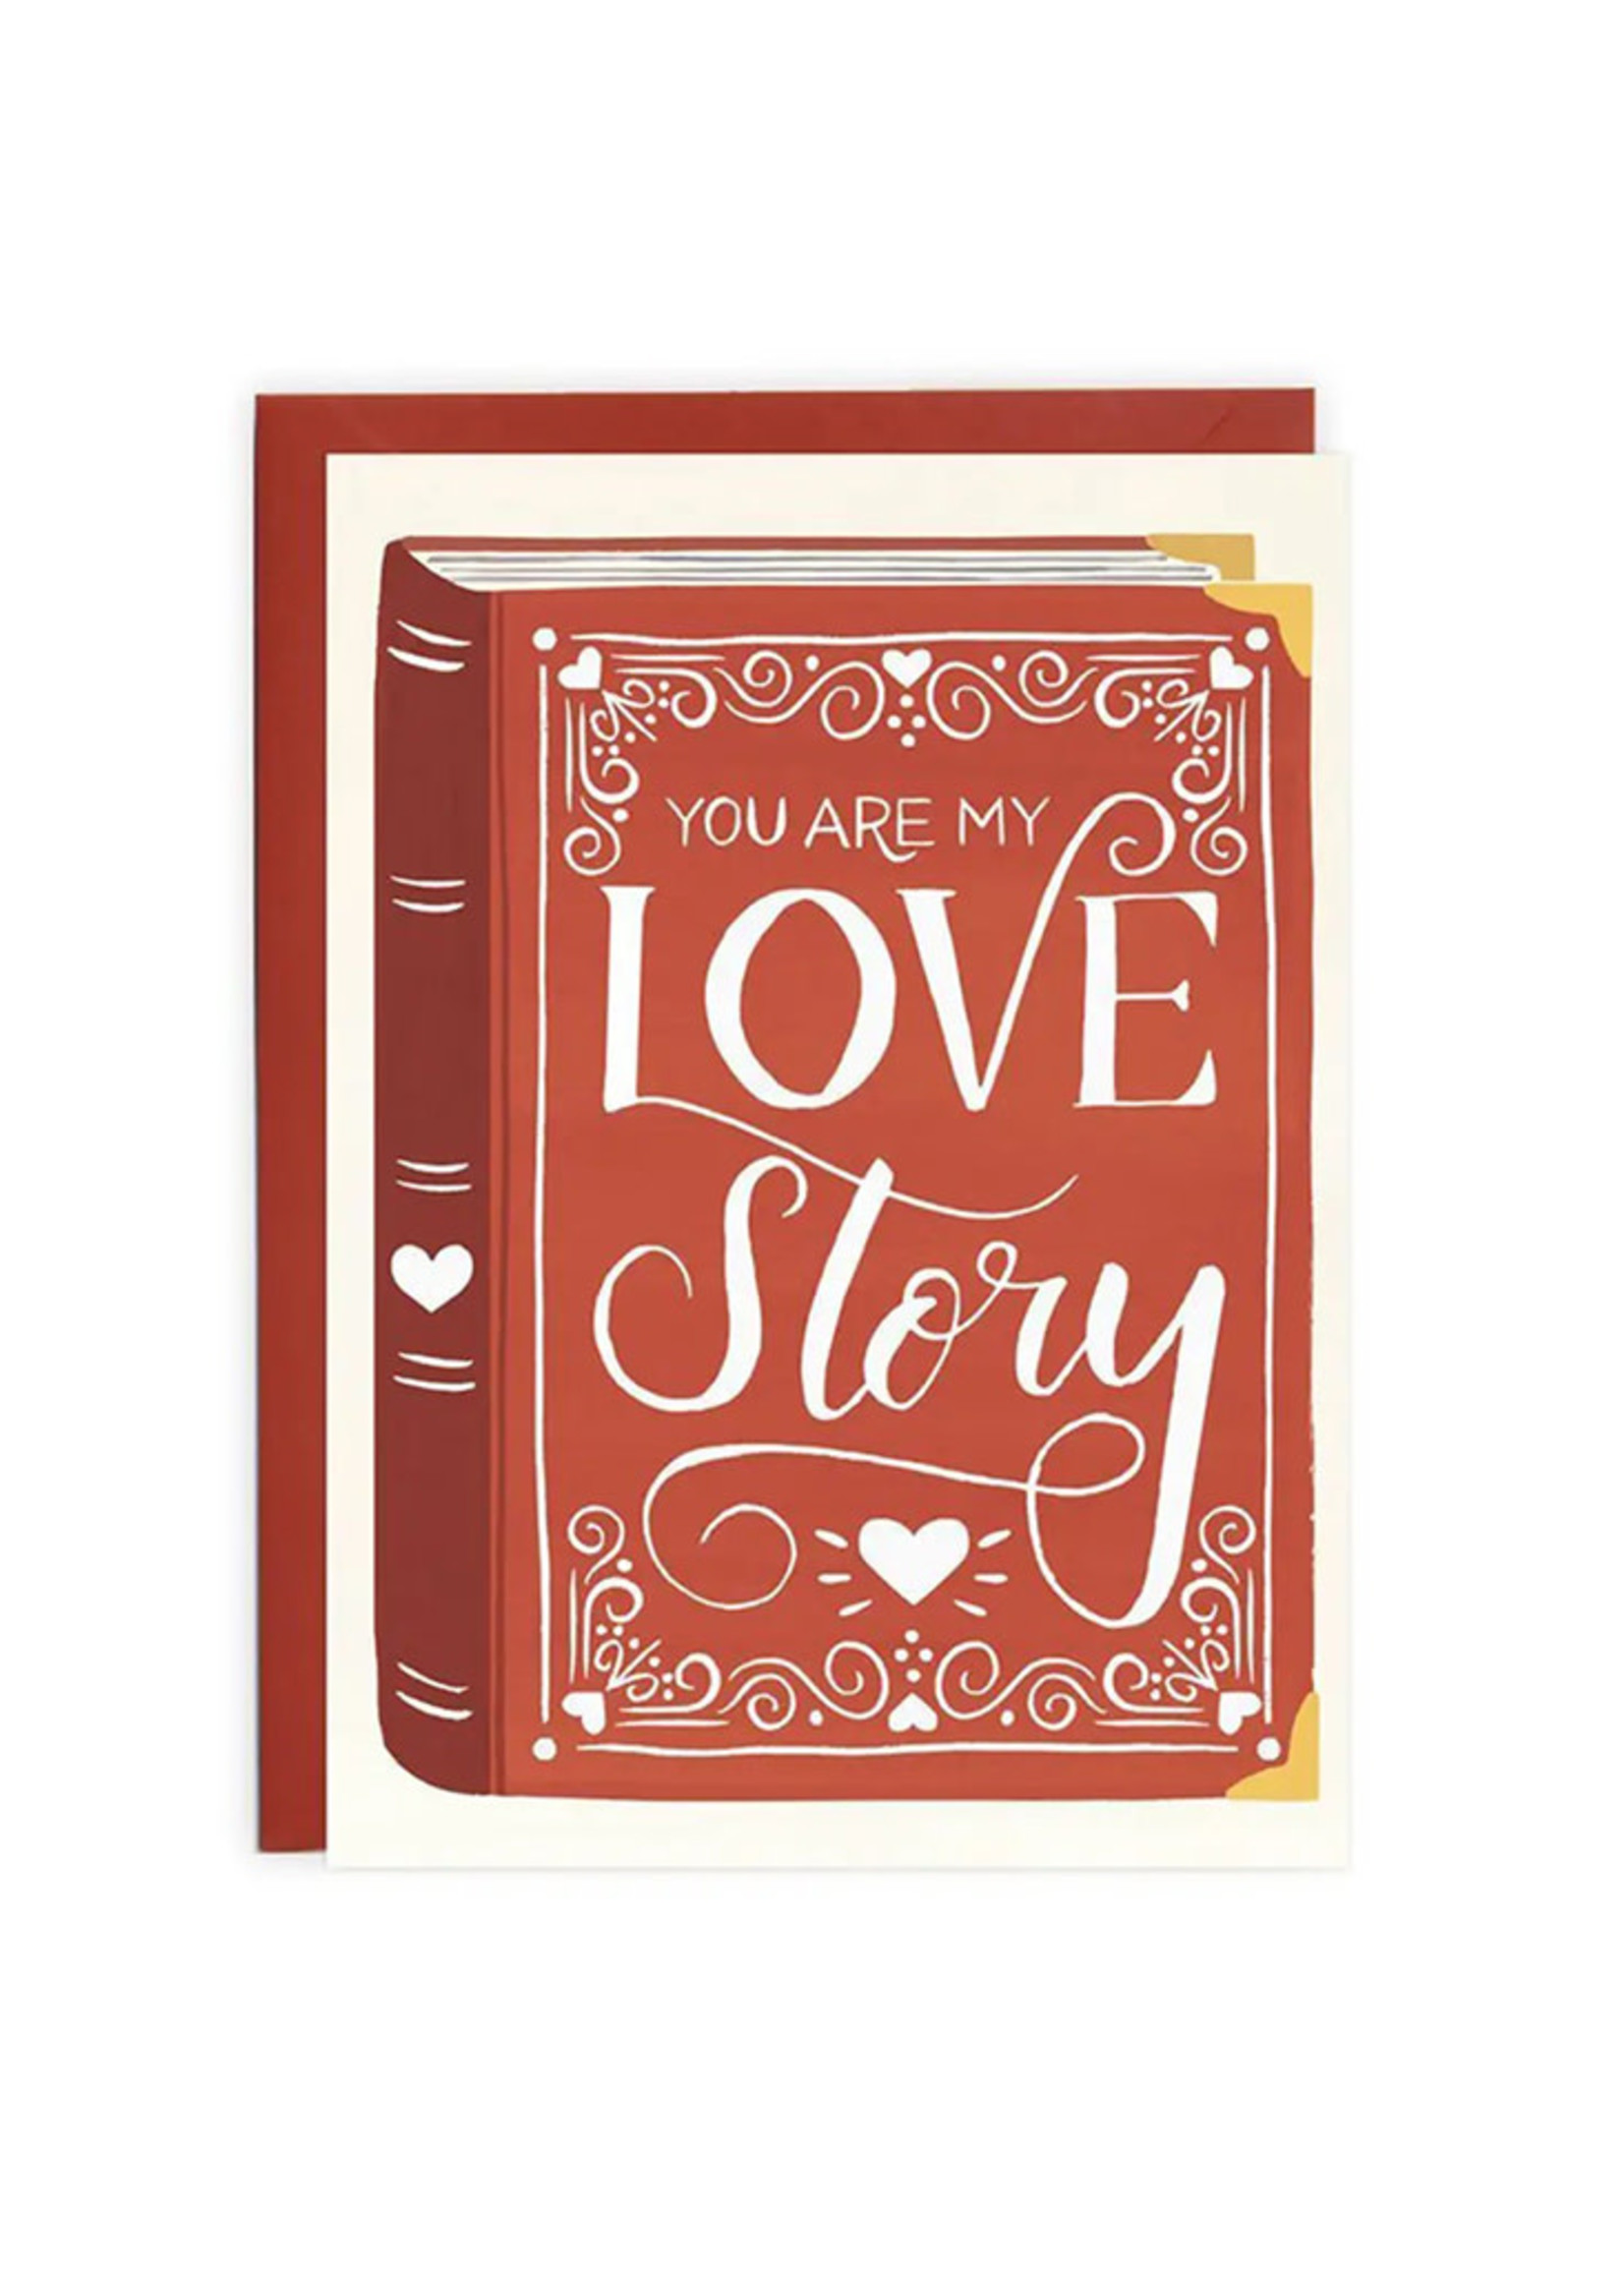 You Are My Love Story Card